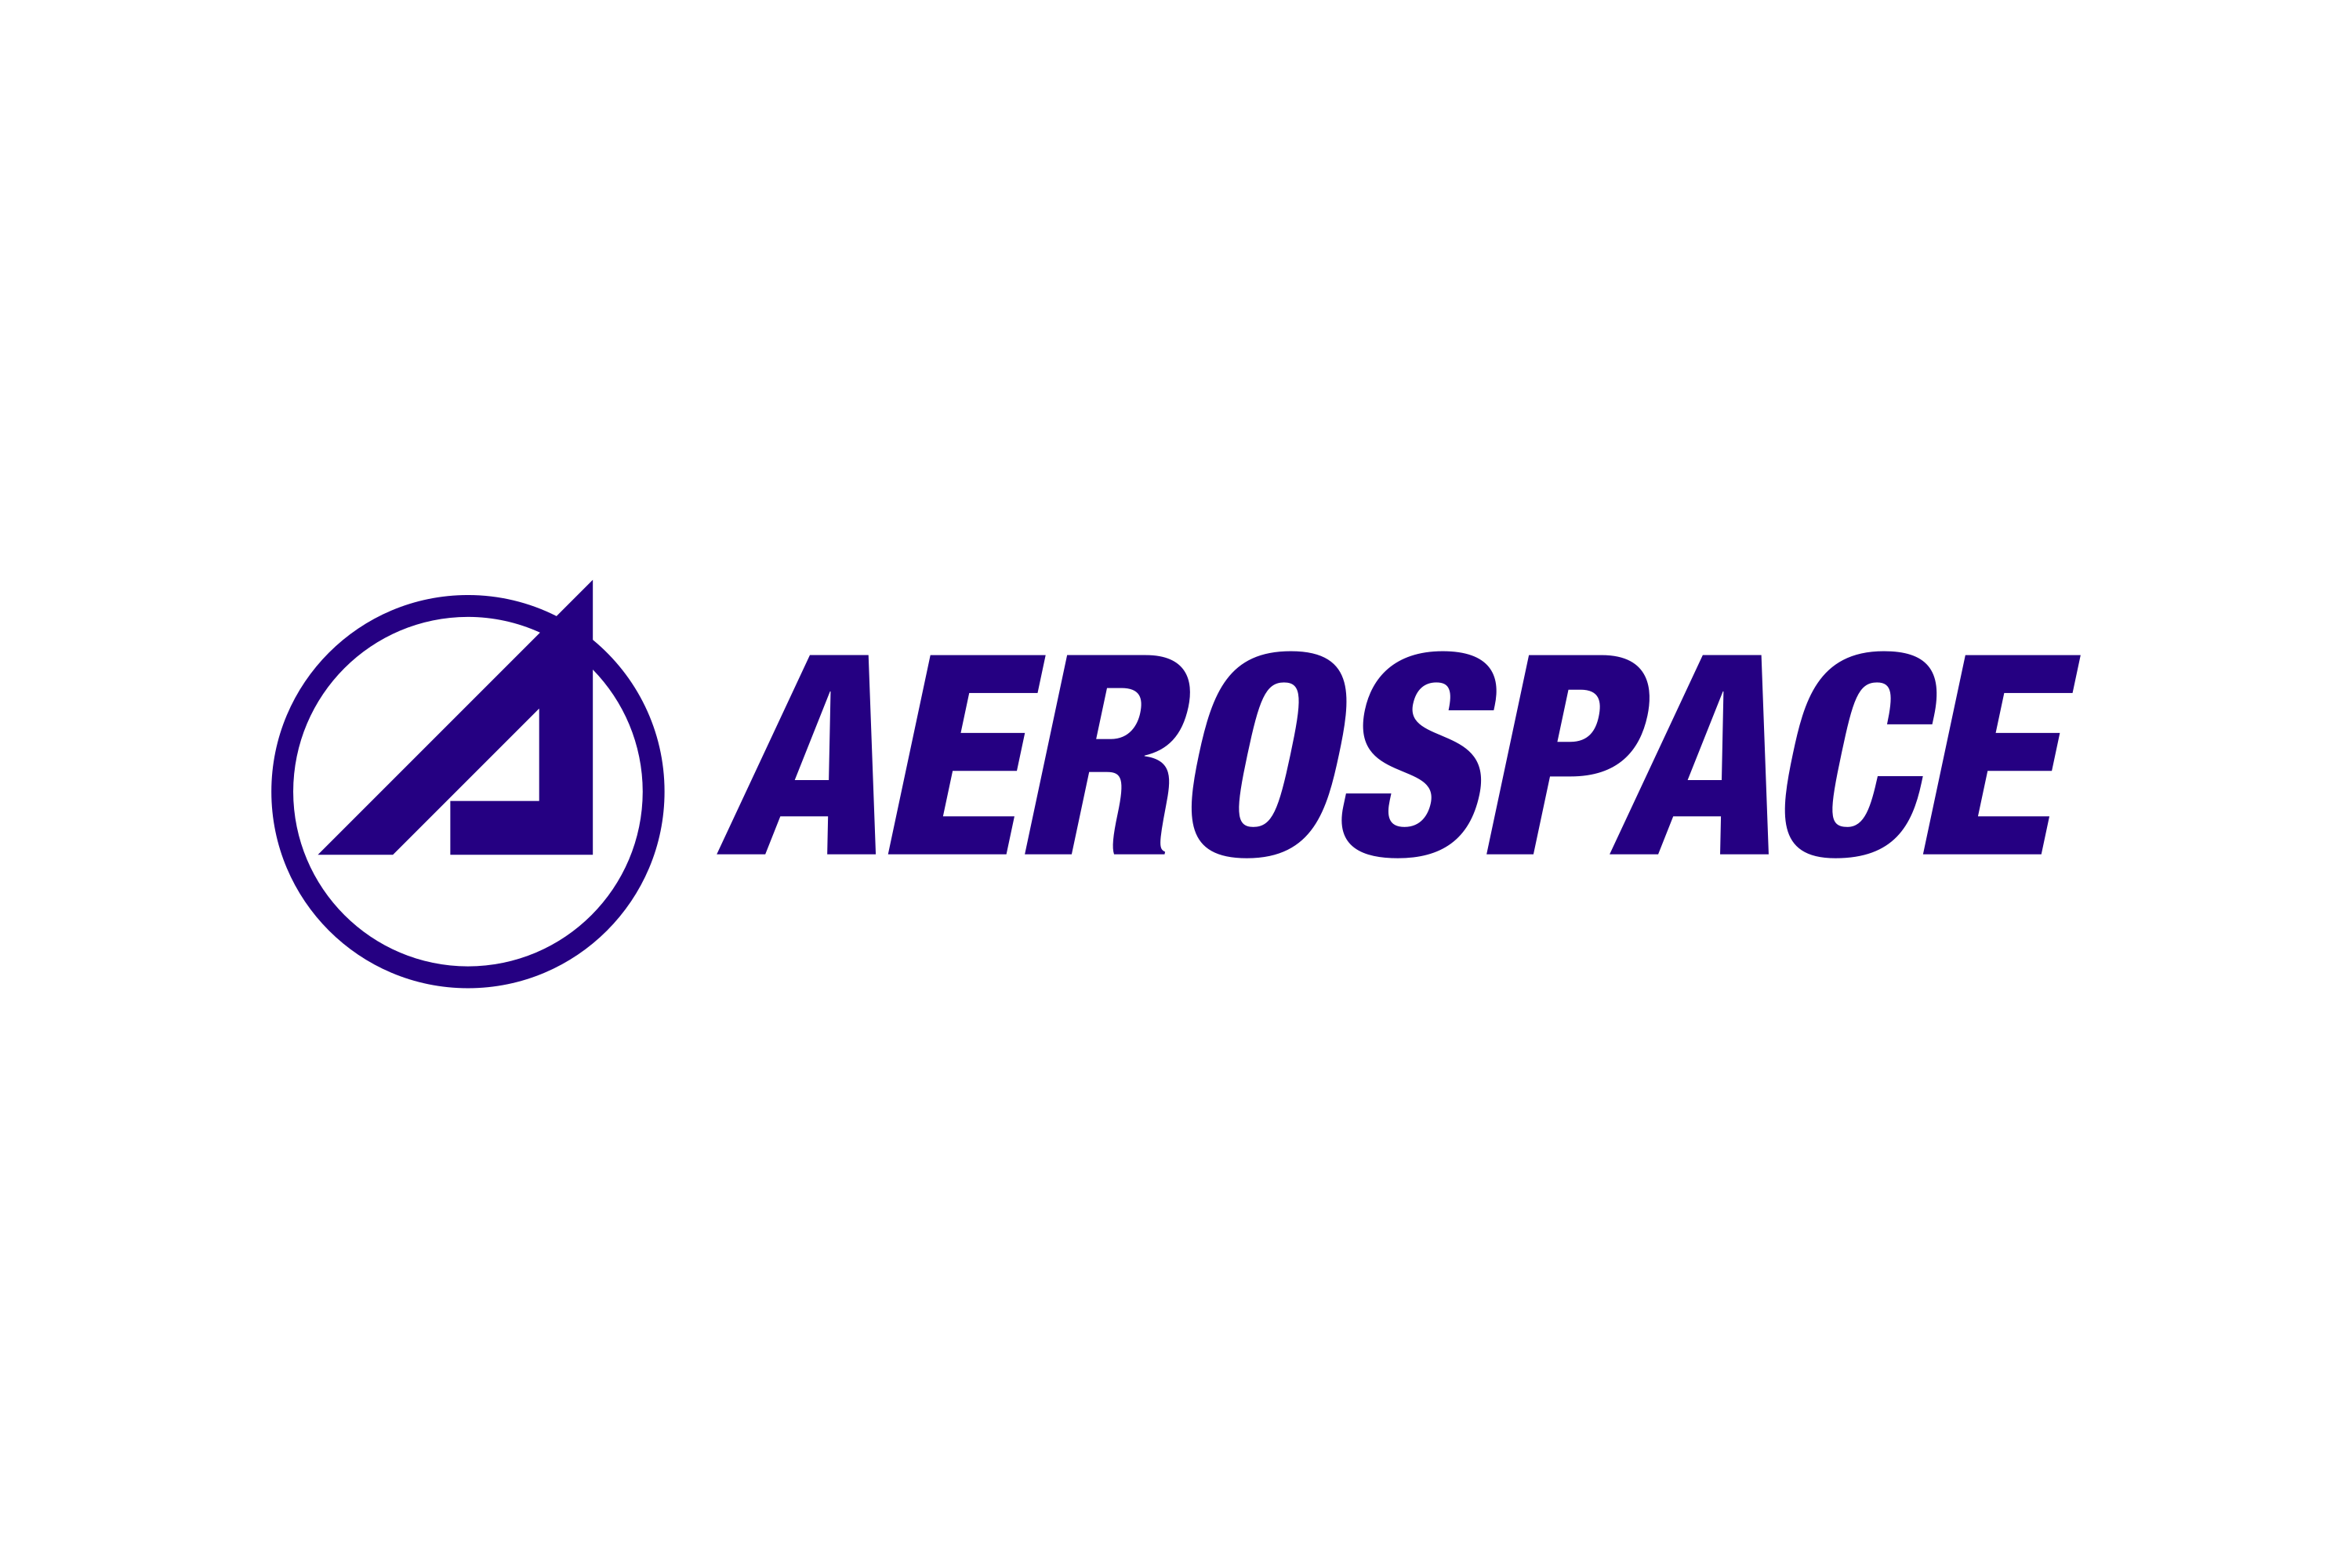 The Aerospace Corporation Logo Png Transparent And Svg Vector Freebie ...